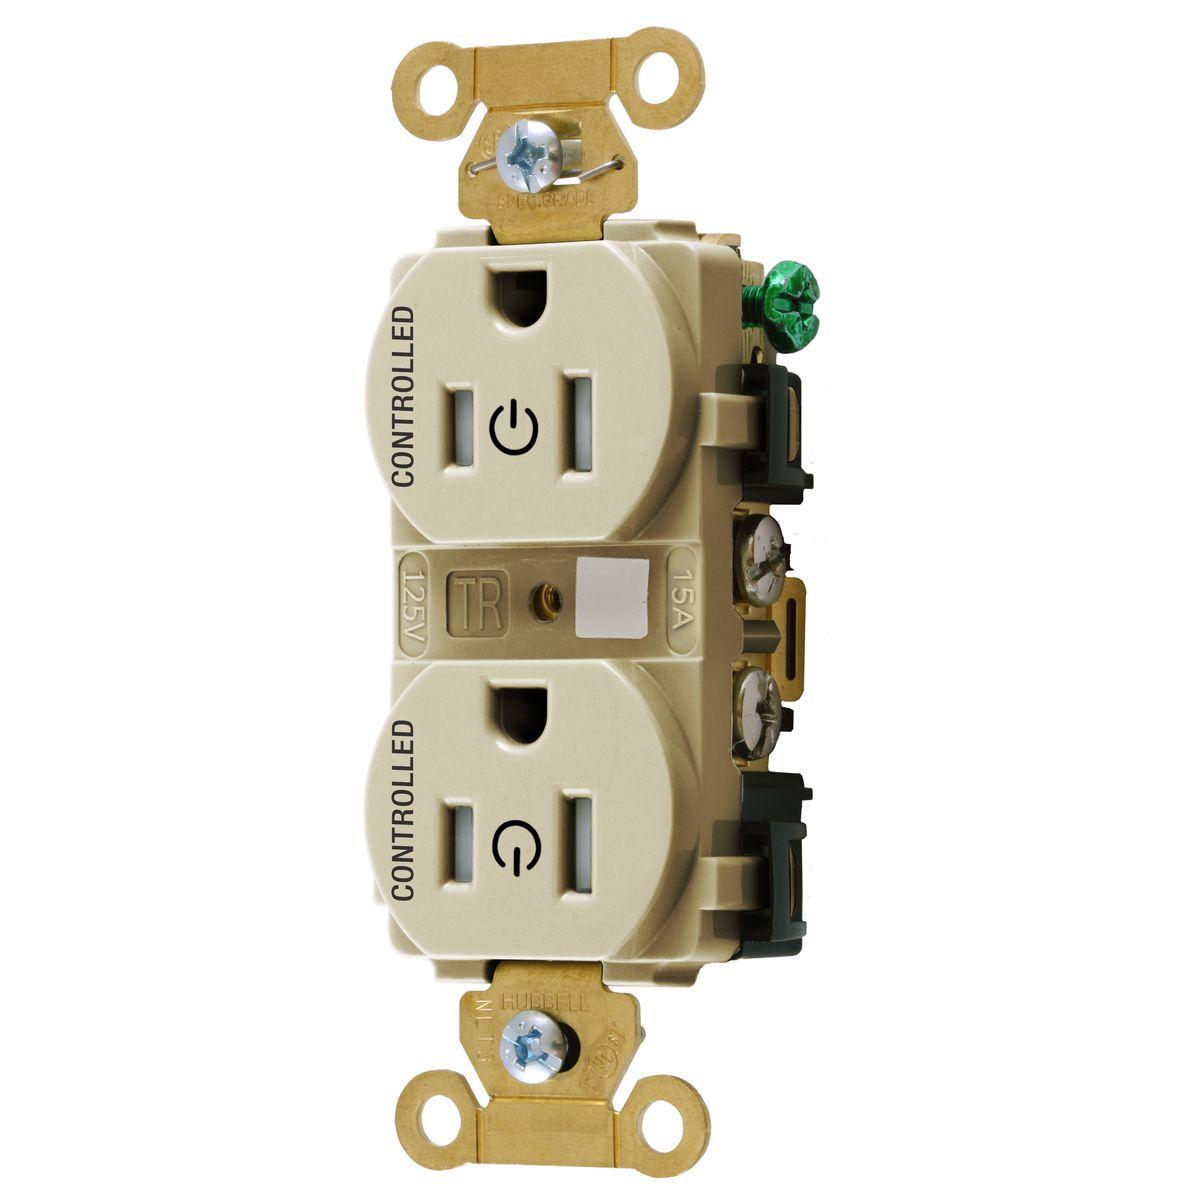 Hubbell HBL5262C2ITR Straight Blade Devices,Extra Heavy Duty Standard Duplex Receptacles for Controlled Applications , Fully Controlled,15A, 125V, 2 Pole, 3 Wire Grounding,Ivory  ; Permanently marked with universal power symbol and the word "CONTROLLED" to visually identify r